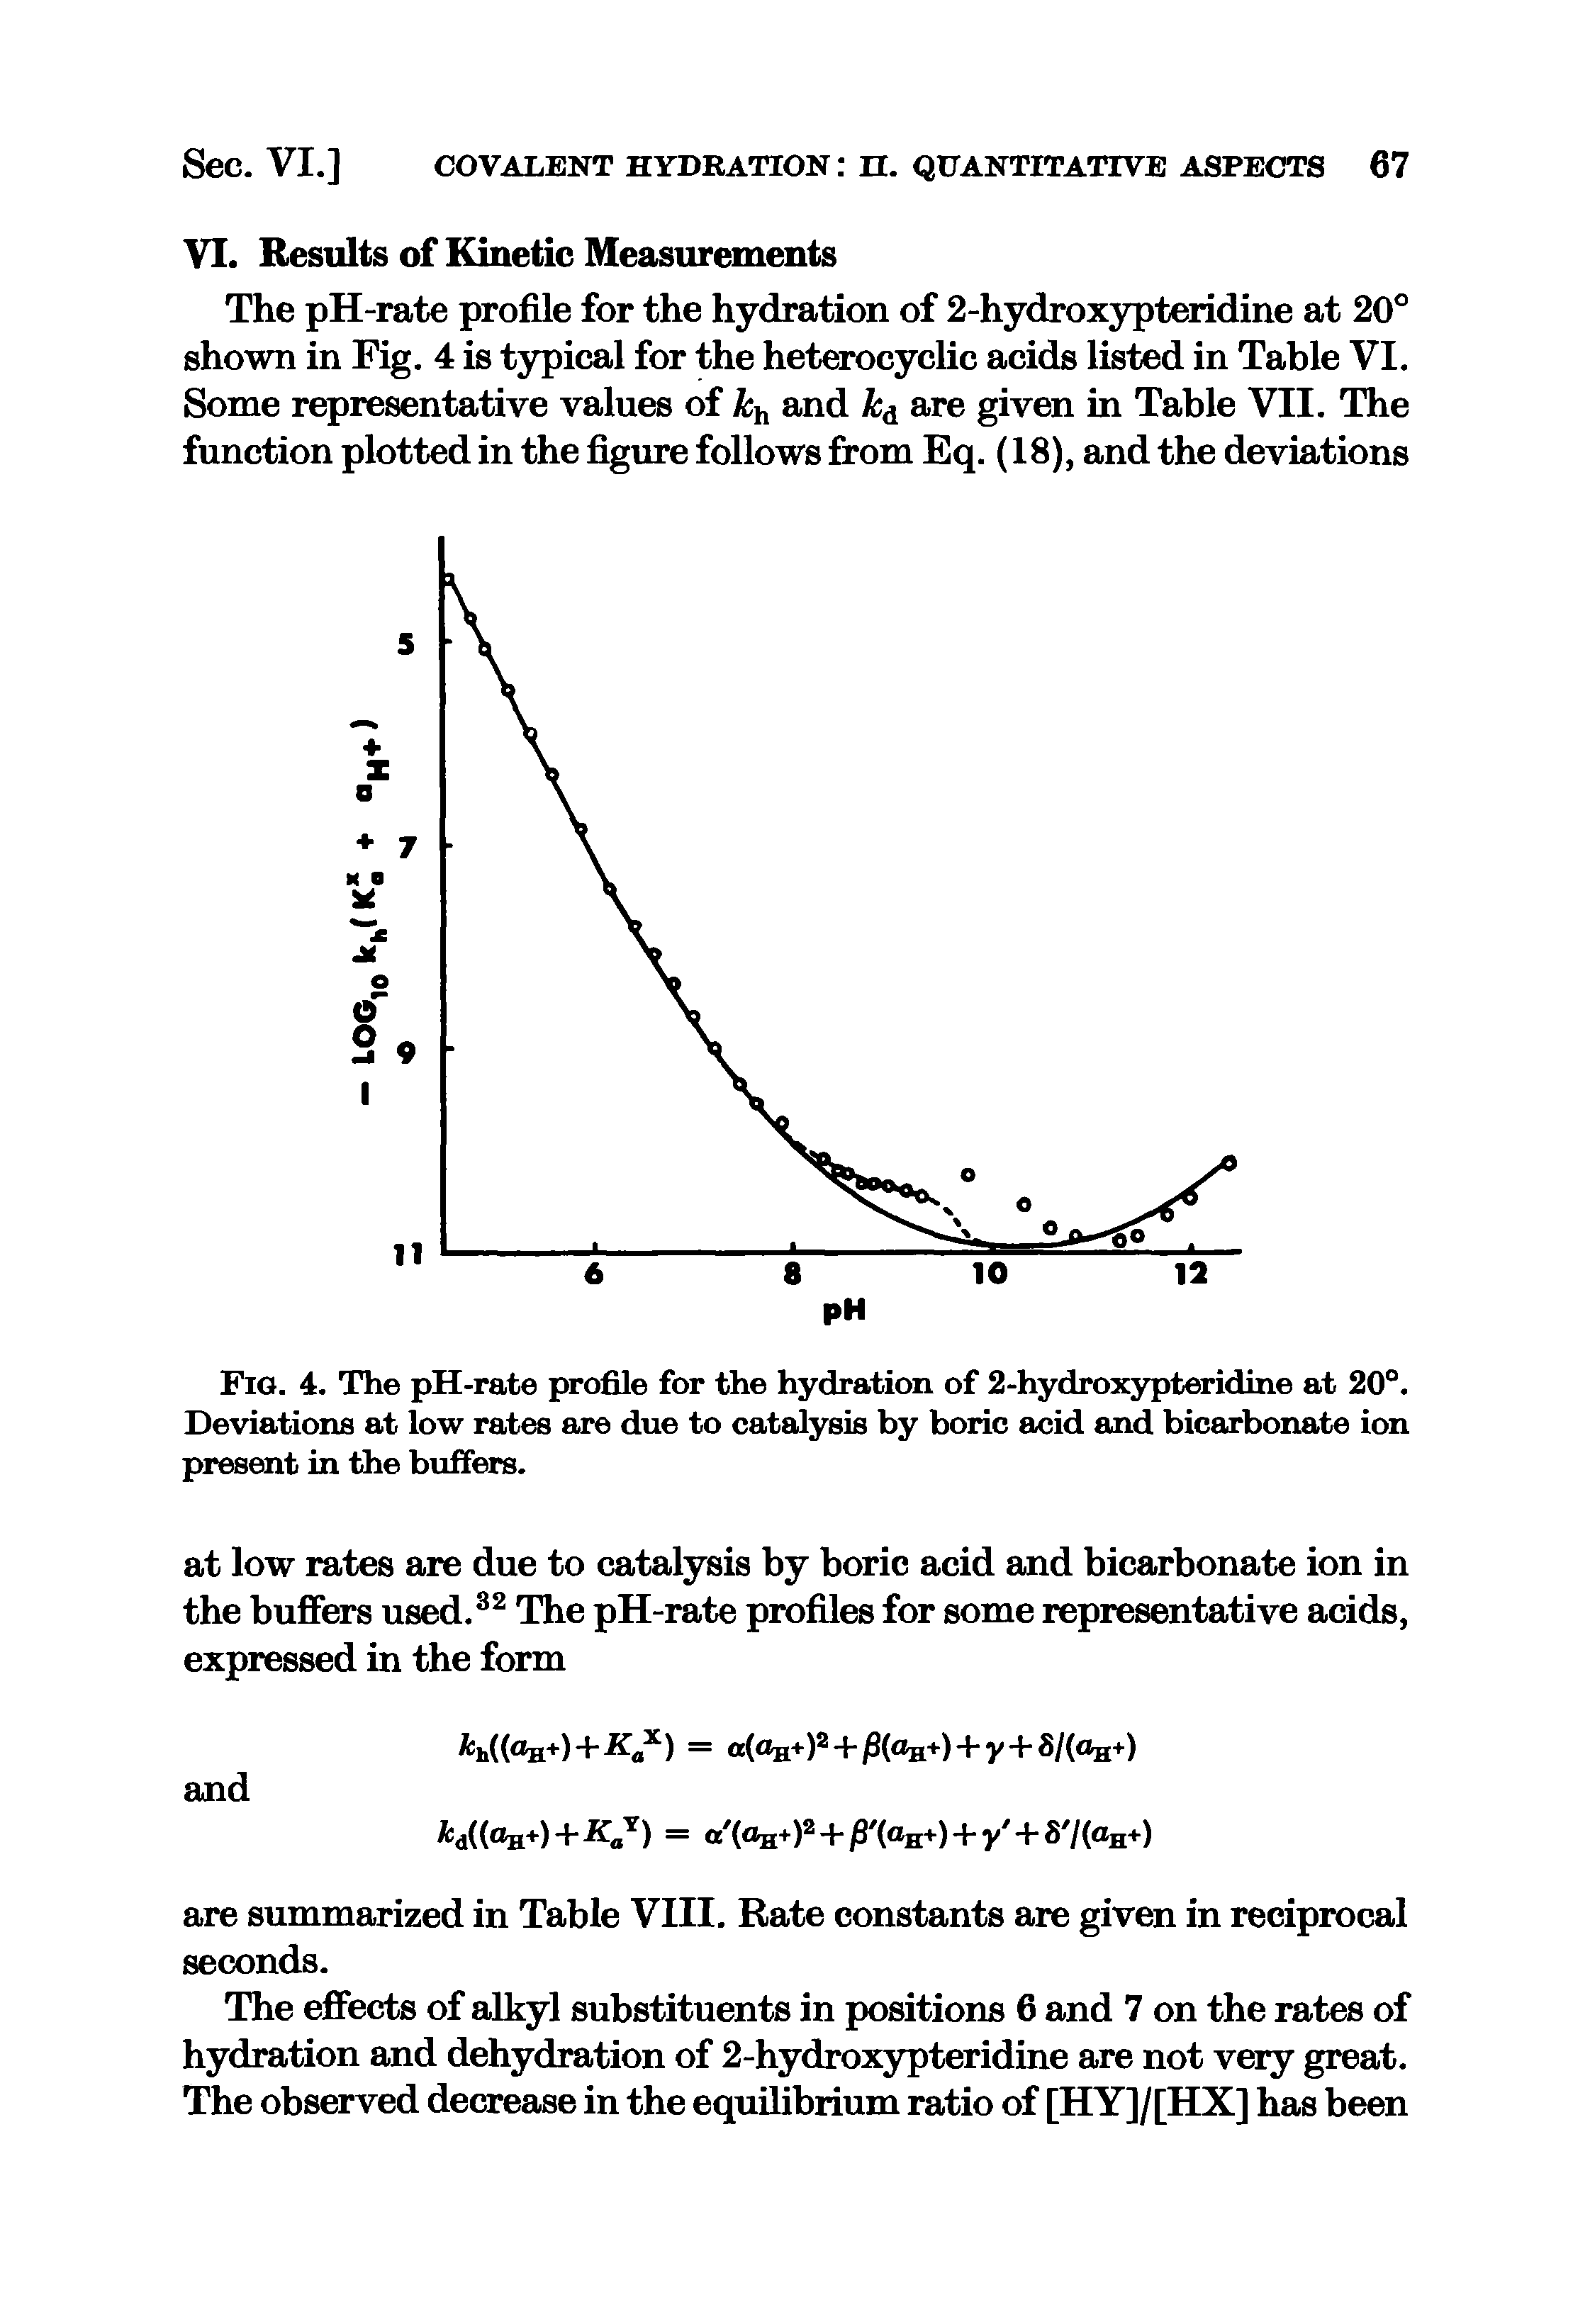 Fig. 4. The pH-rate profile for the hydration of 2-hydroxypteridine at 20°. Deviations at low rates are due to catalysis by boric acid and bicarbonate ion present in the buffers.